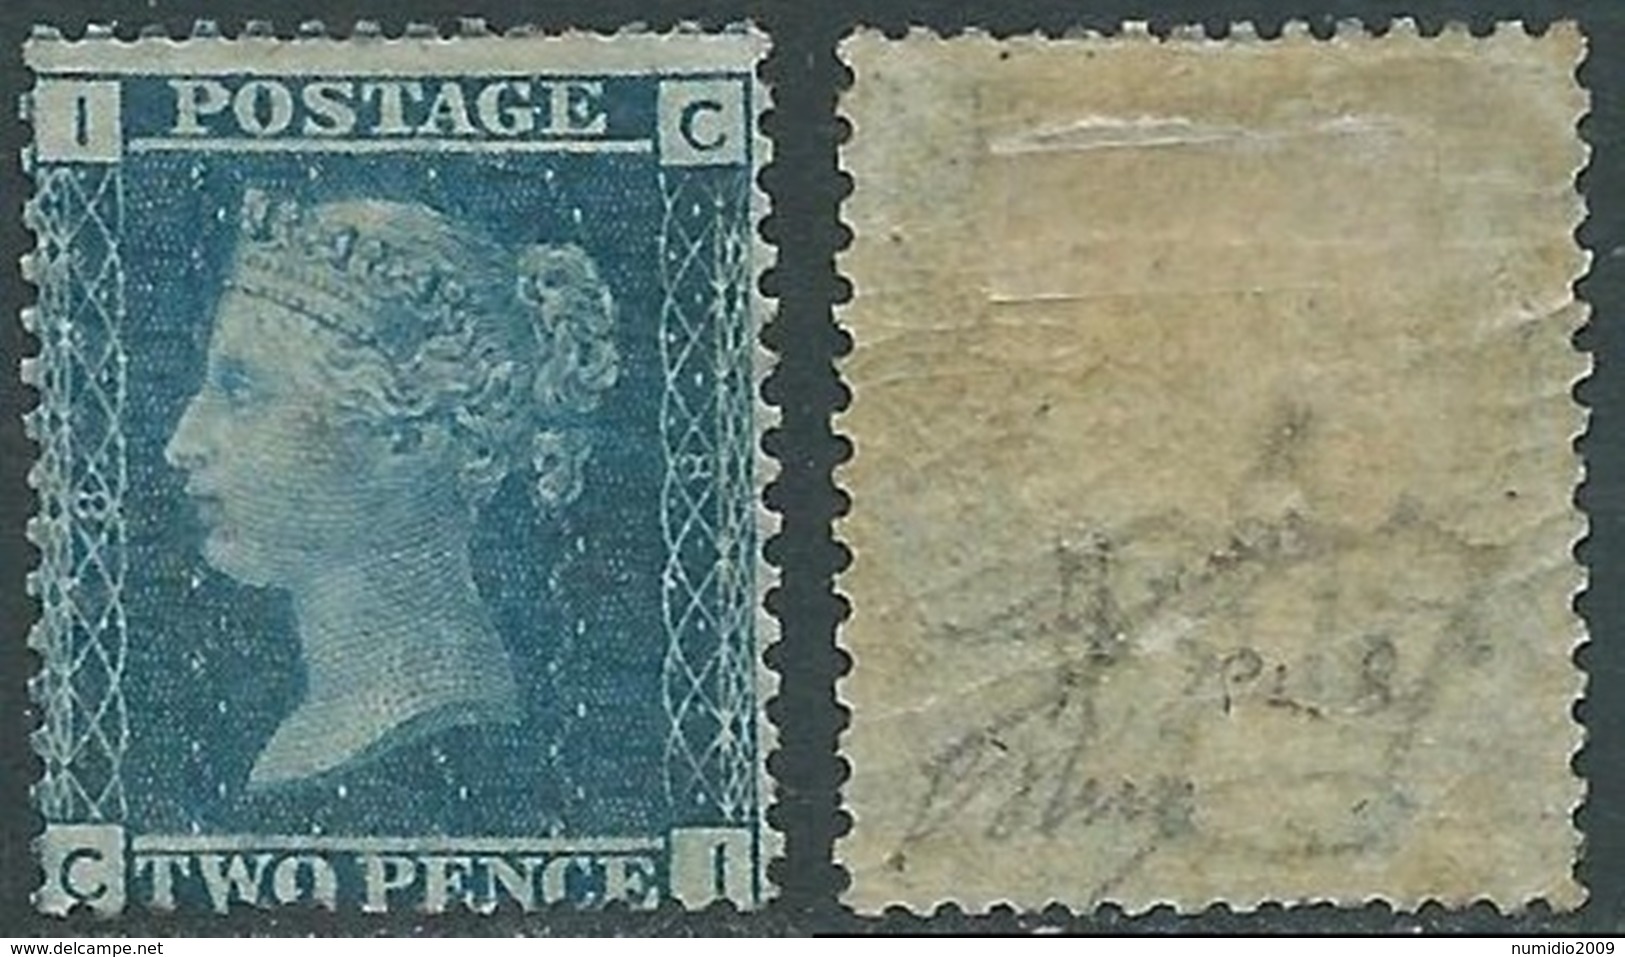 1858-79 GREAT BRITAIN SG 45 2d PLATE 8 (CI) MH * - RC6-7 - Unused Stamps